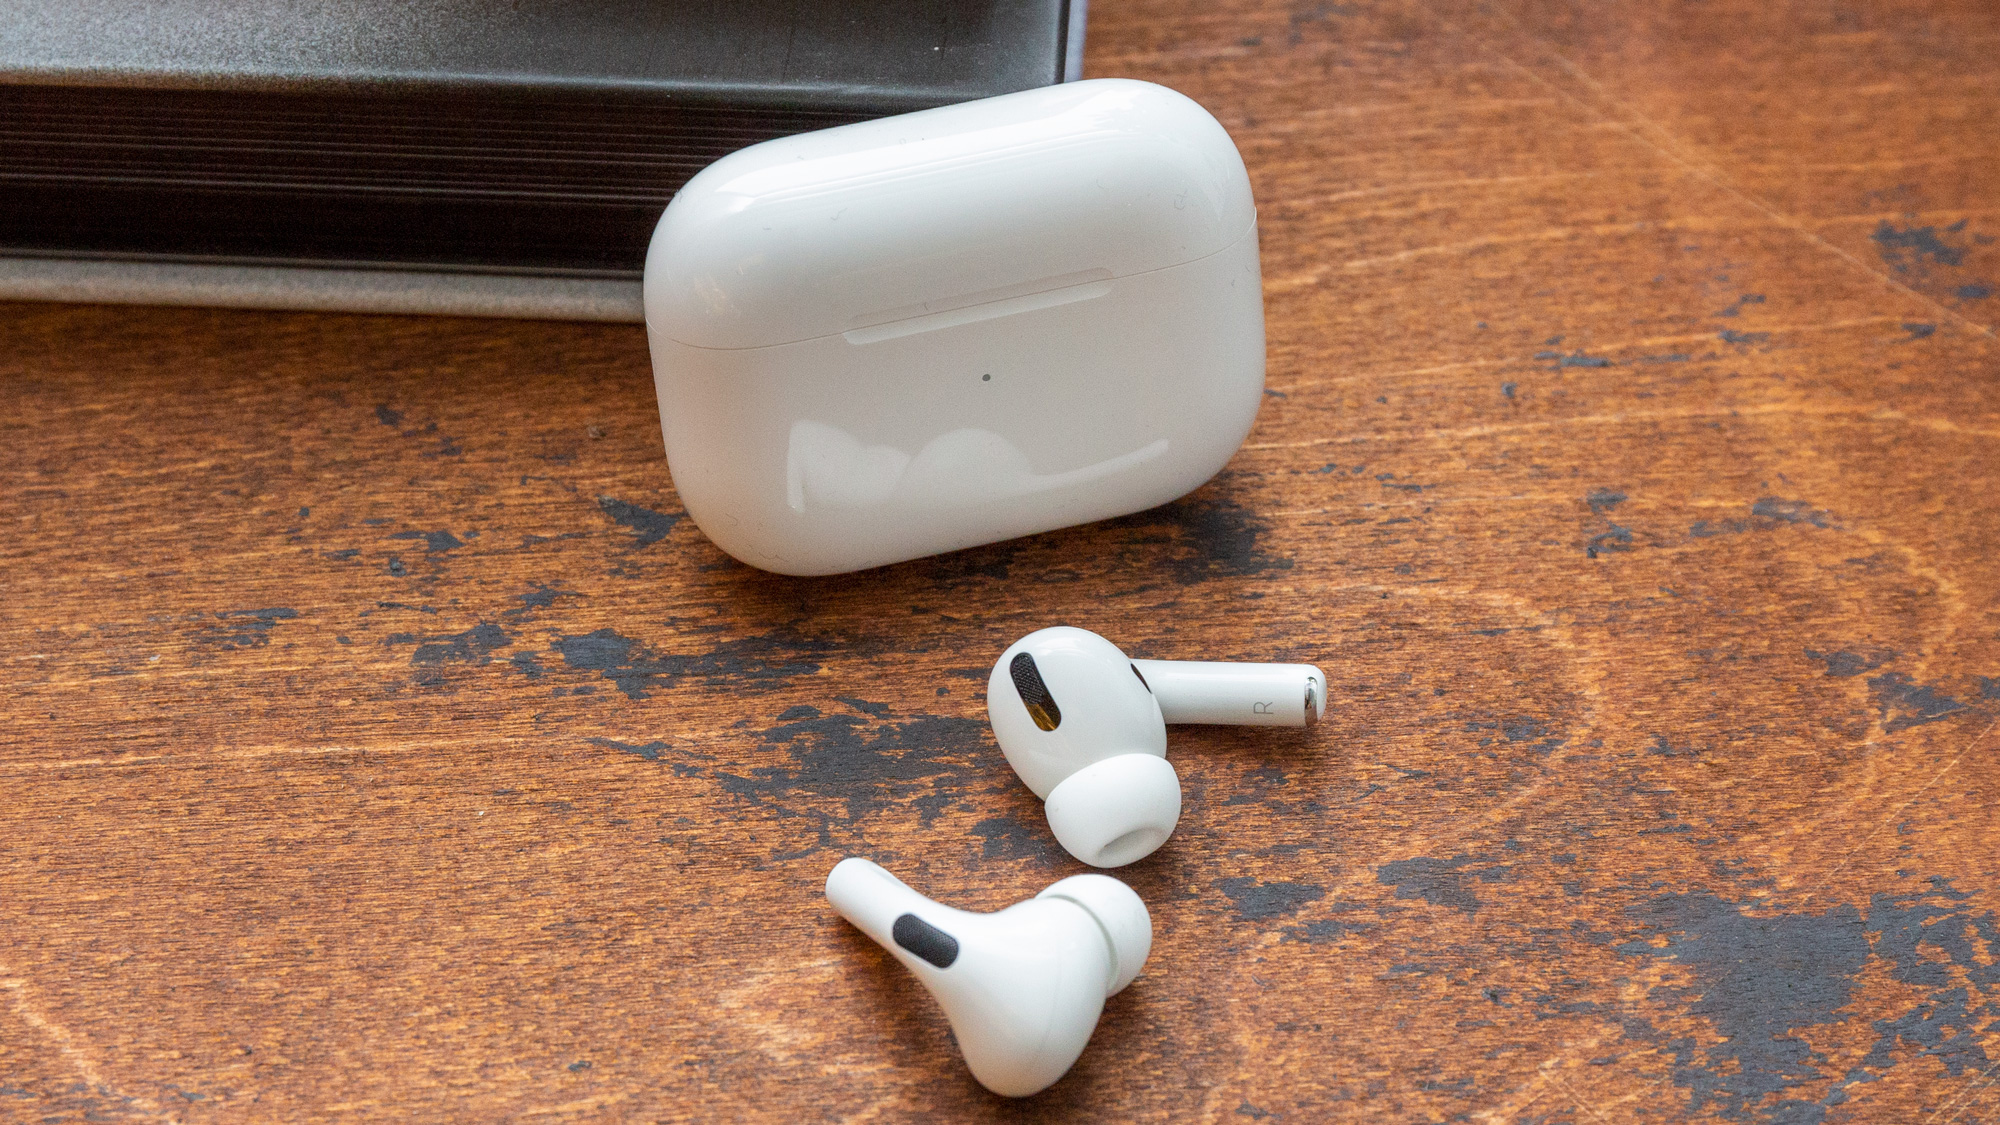 Stay Connected: The Foolproof Method For Pairing Your AirPods With Any Device